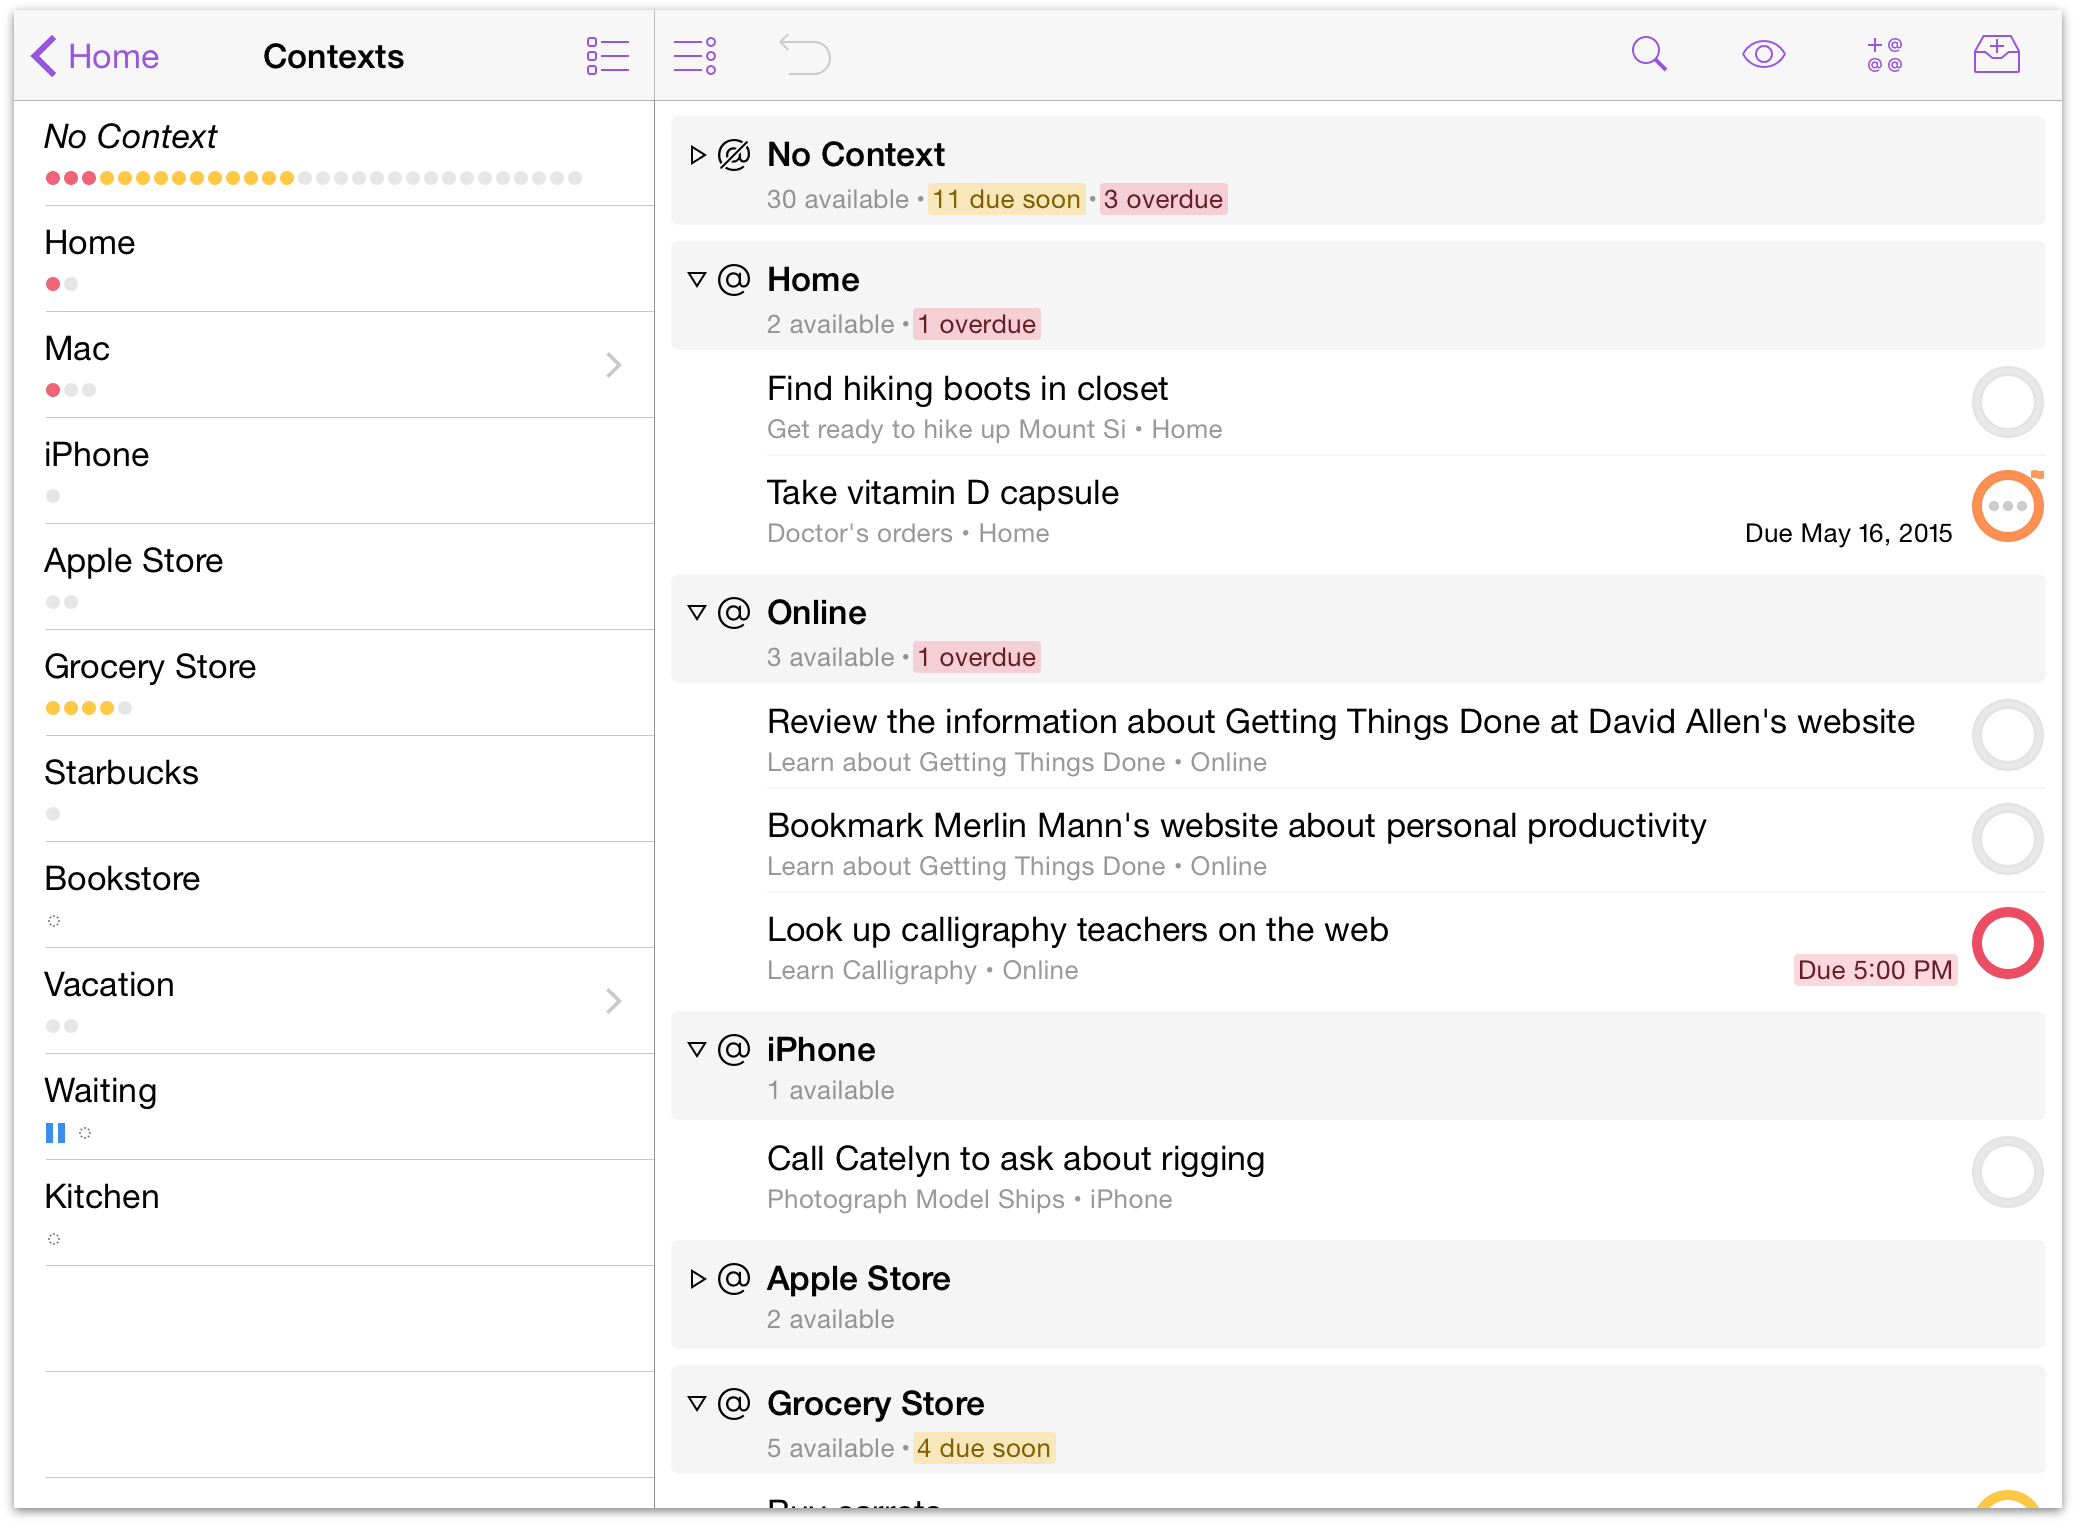 An example of the Contexts perspective in OmniFocus 2 for iOS on iPad.